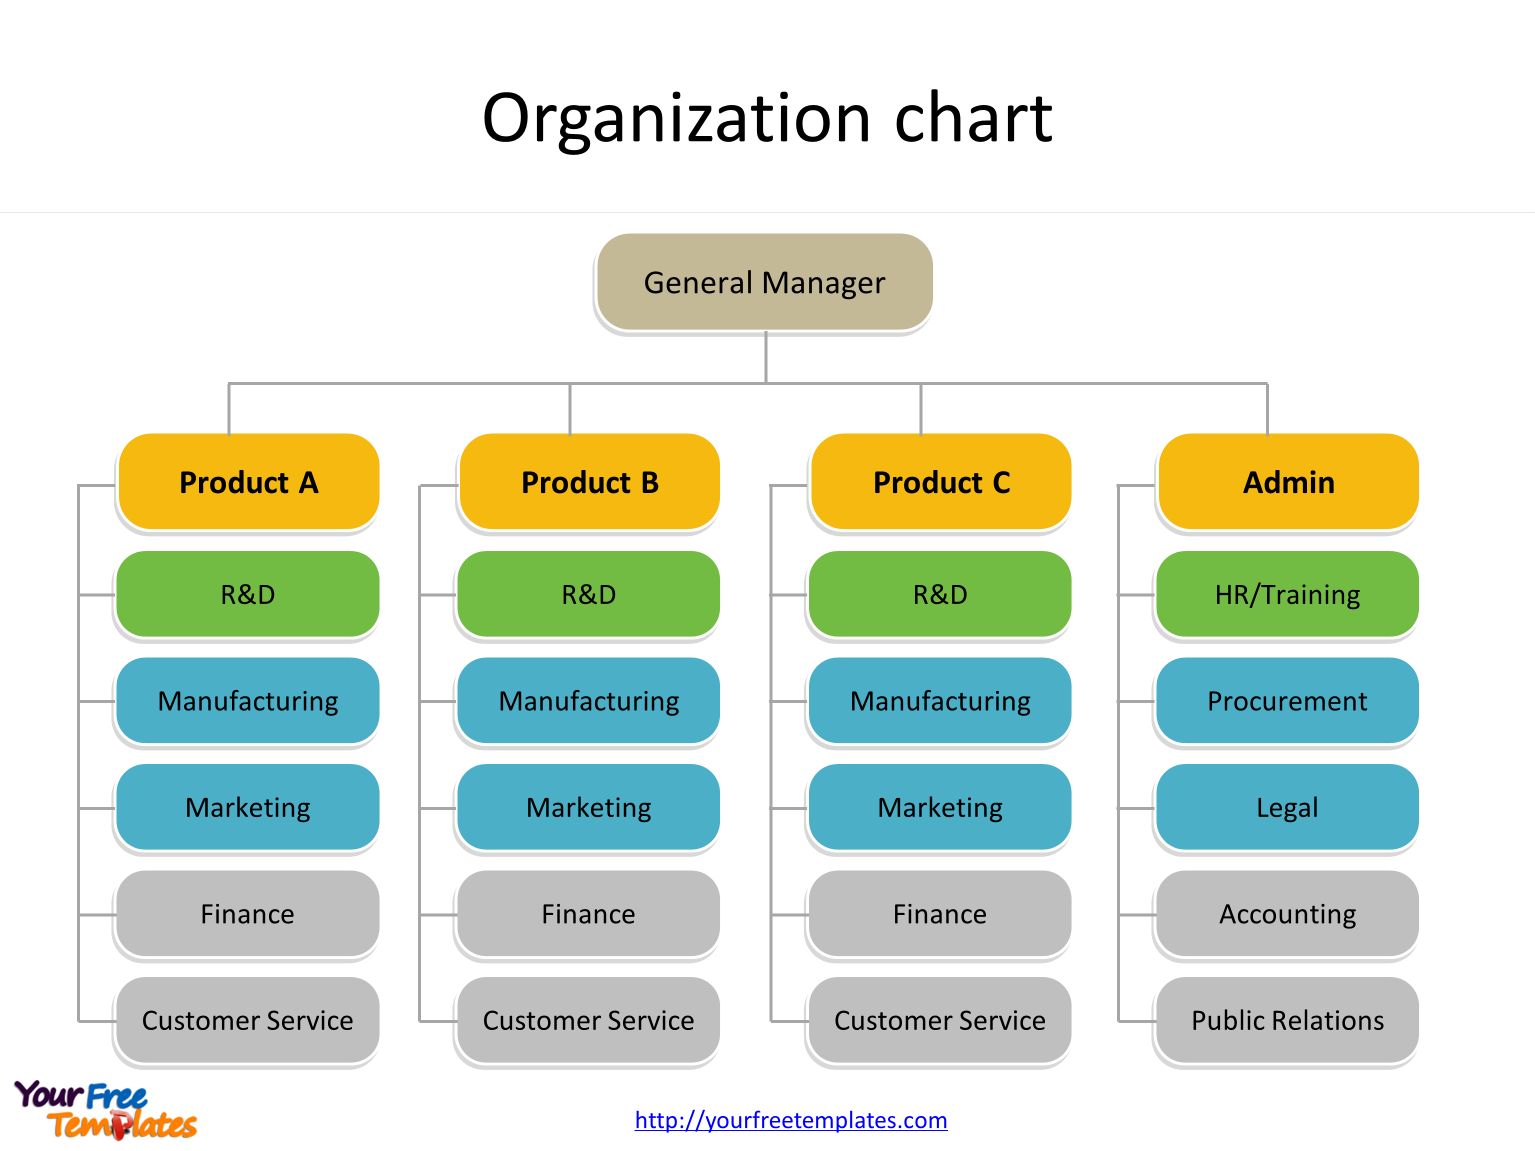 Organization chart template with hierarchy structure.